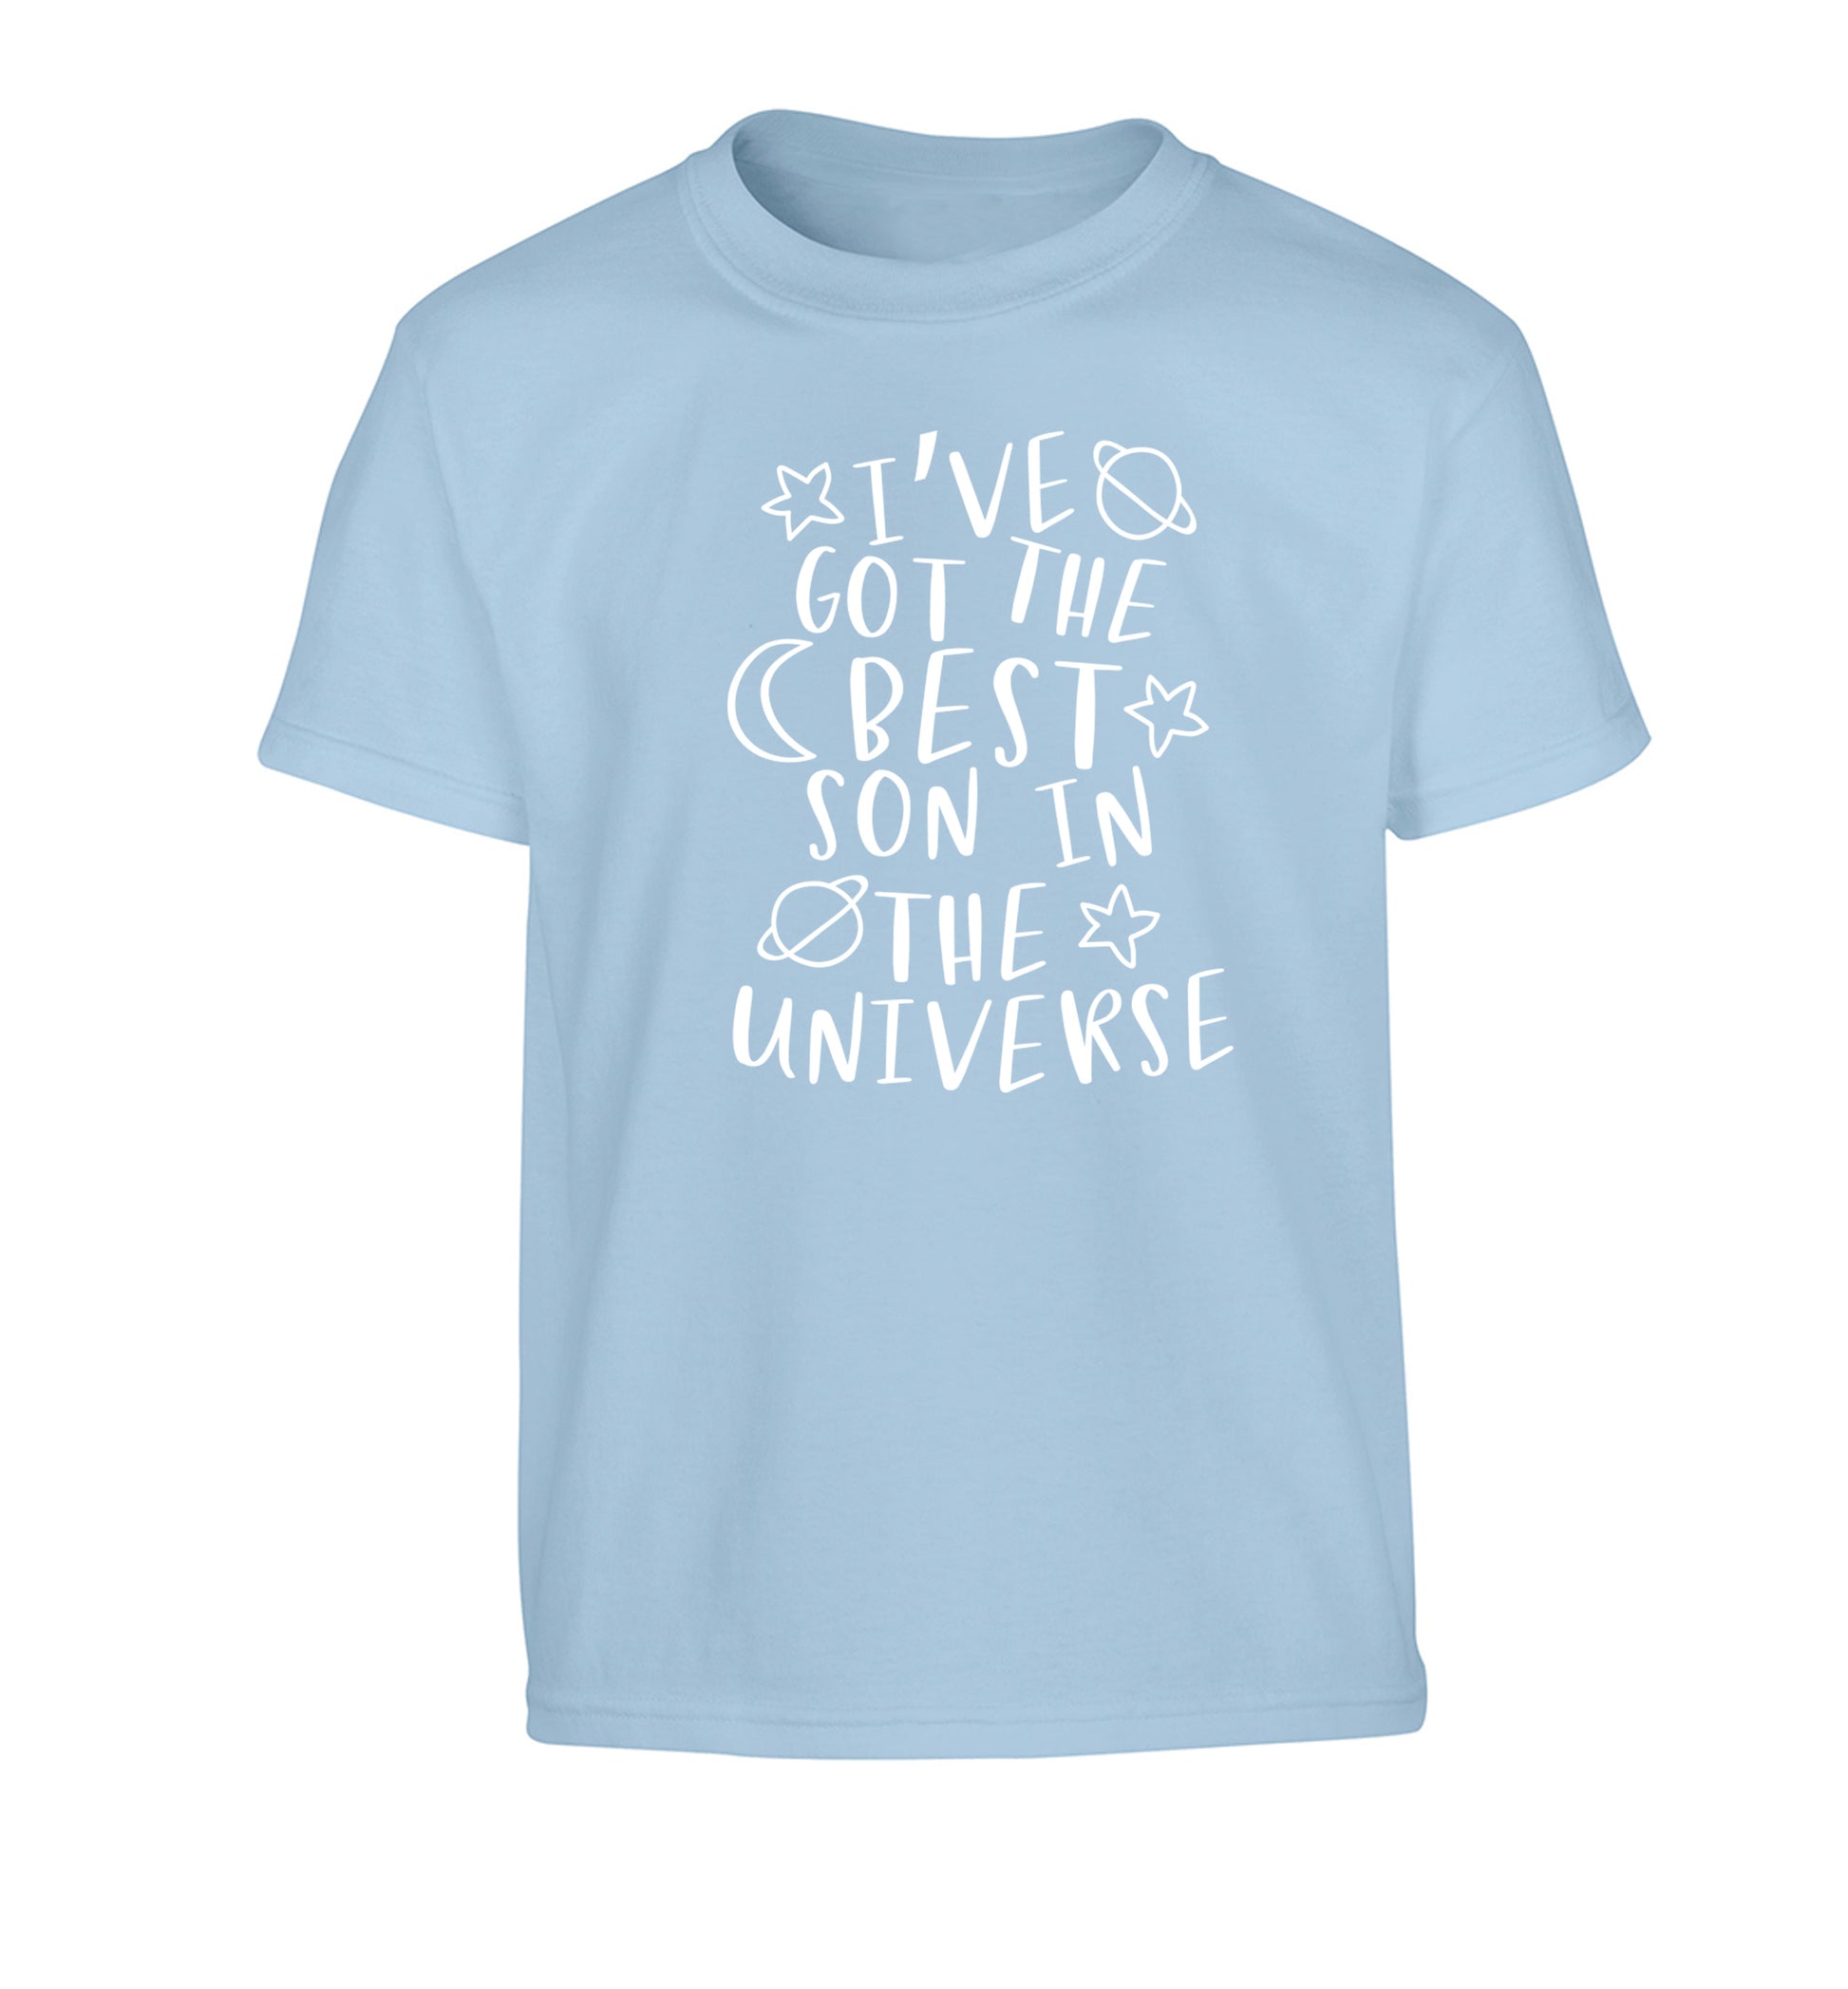 I've got the best son in the universe Children's light blue Tshirt 12-13 Years